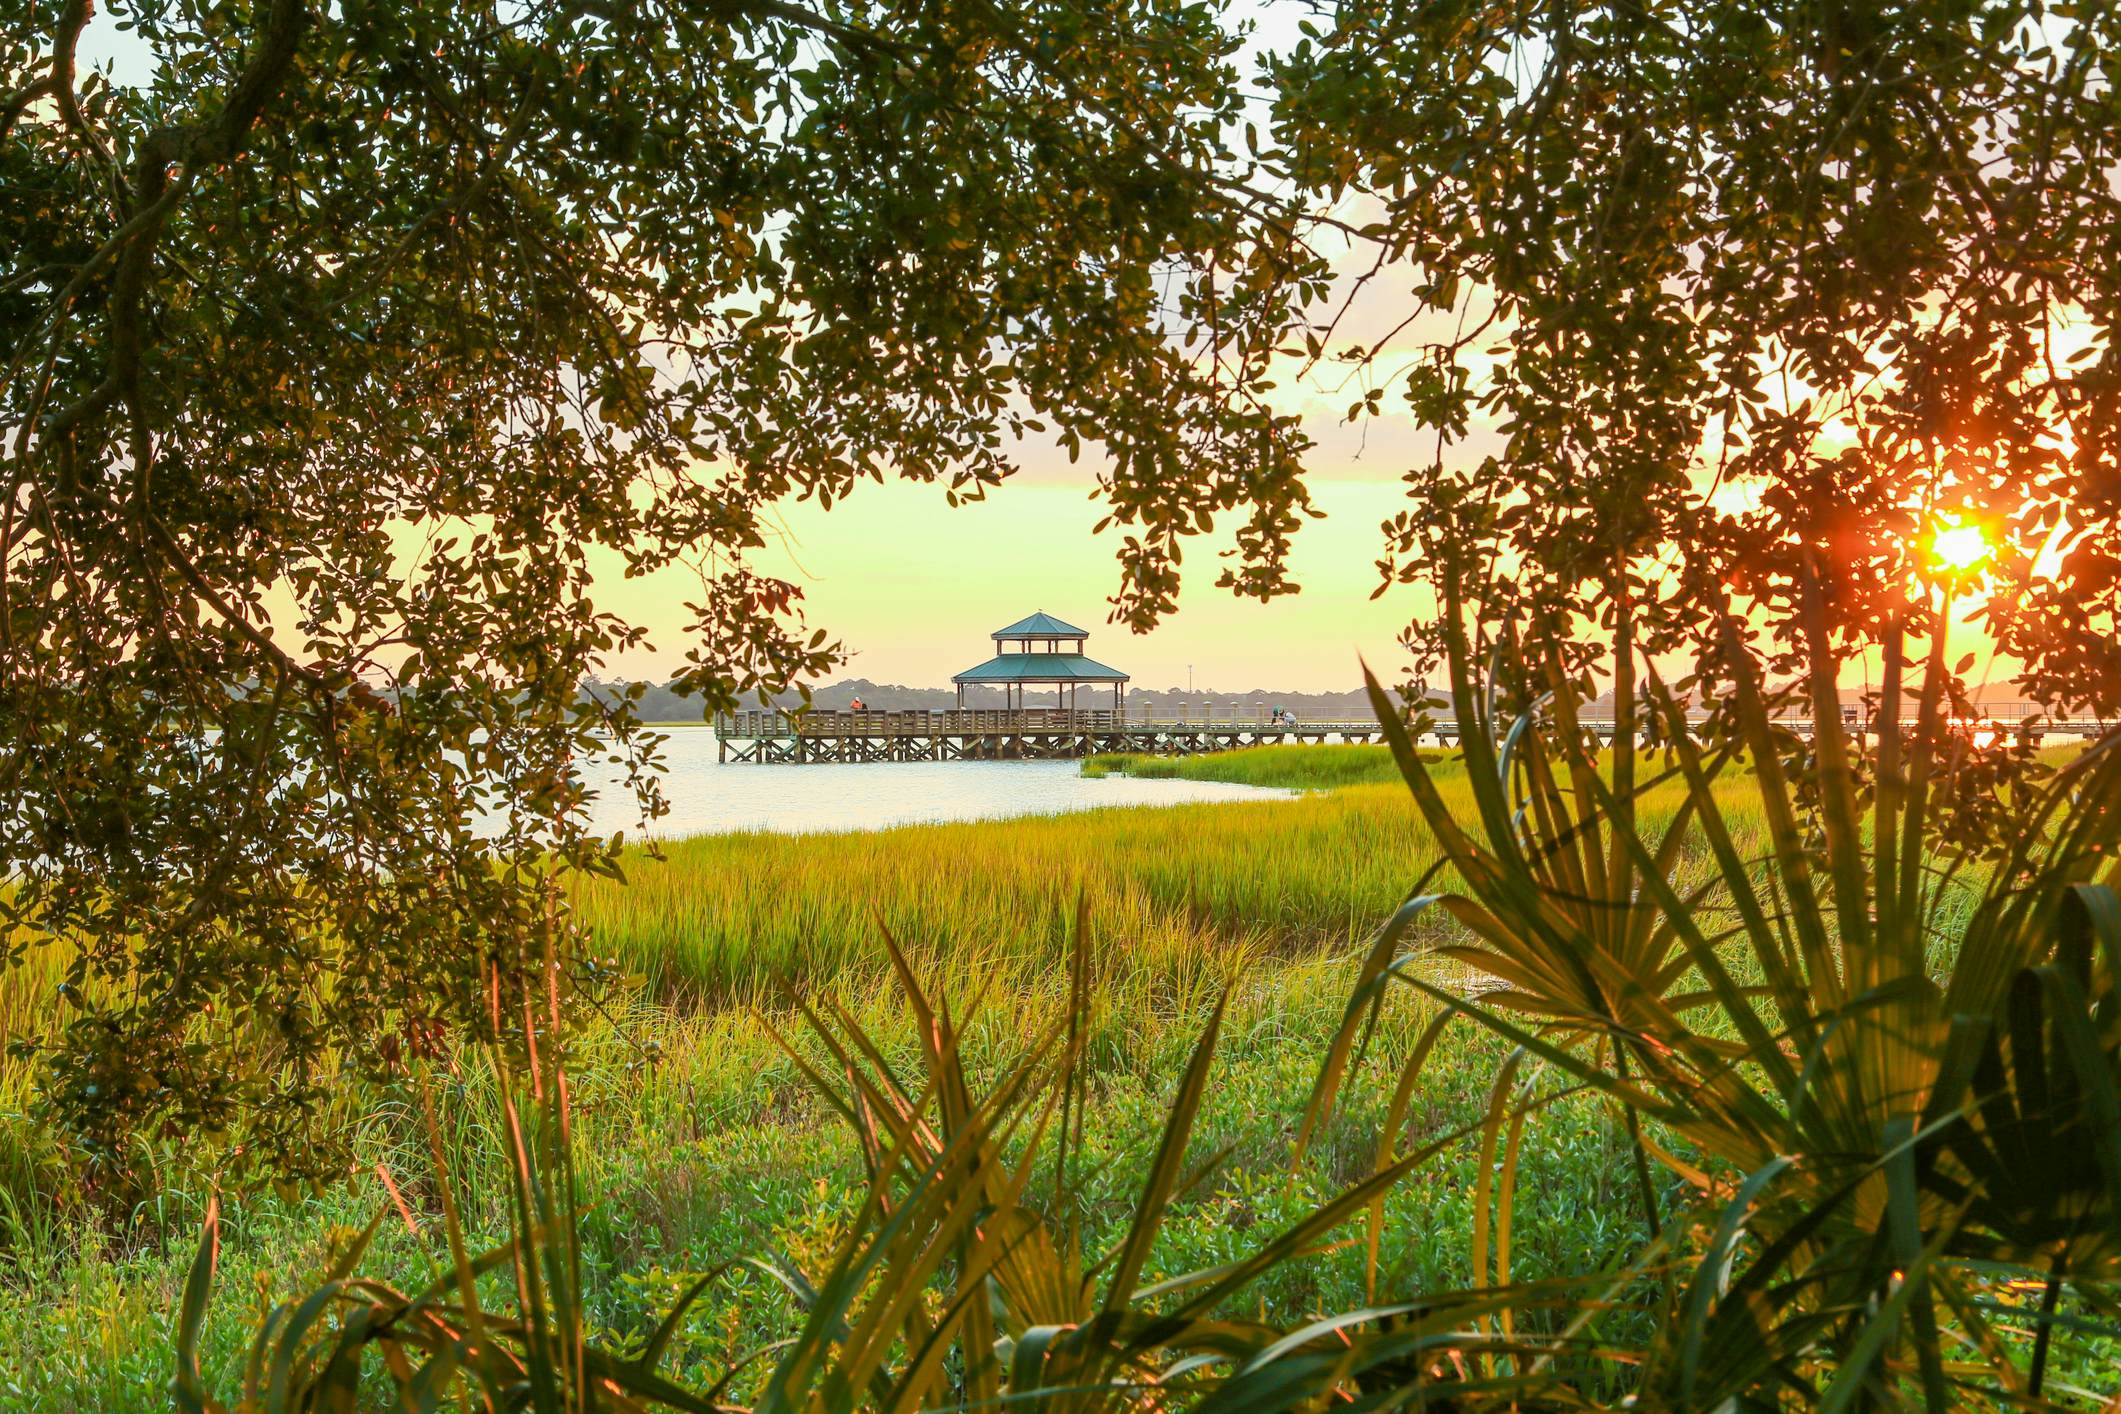 South Carolina Road Trip Guide of the Low Country​